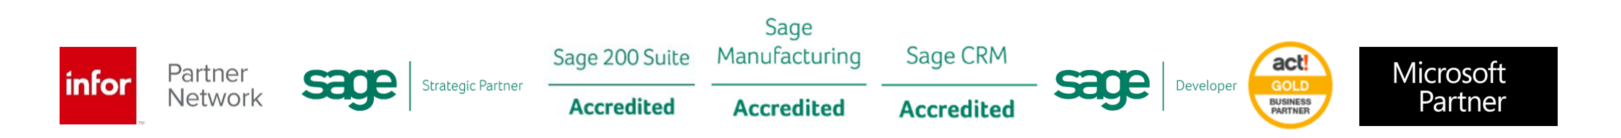 Sage 200 Bill of Materials (BOM) – Full Manufacturing Suite for Sage 200